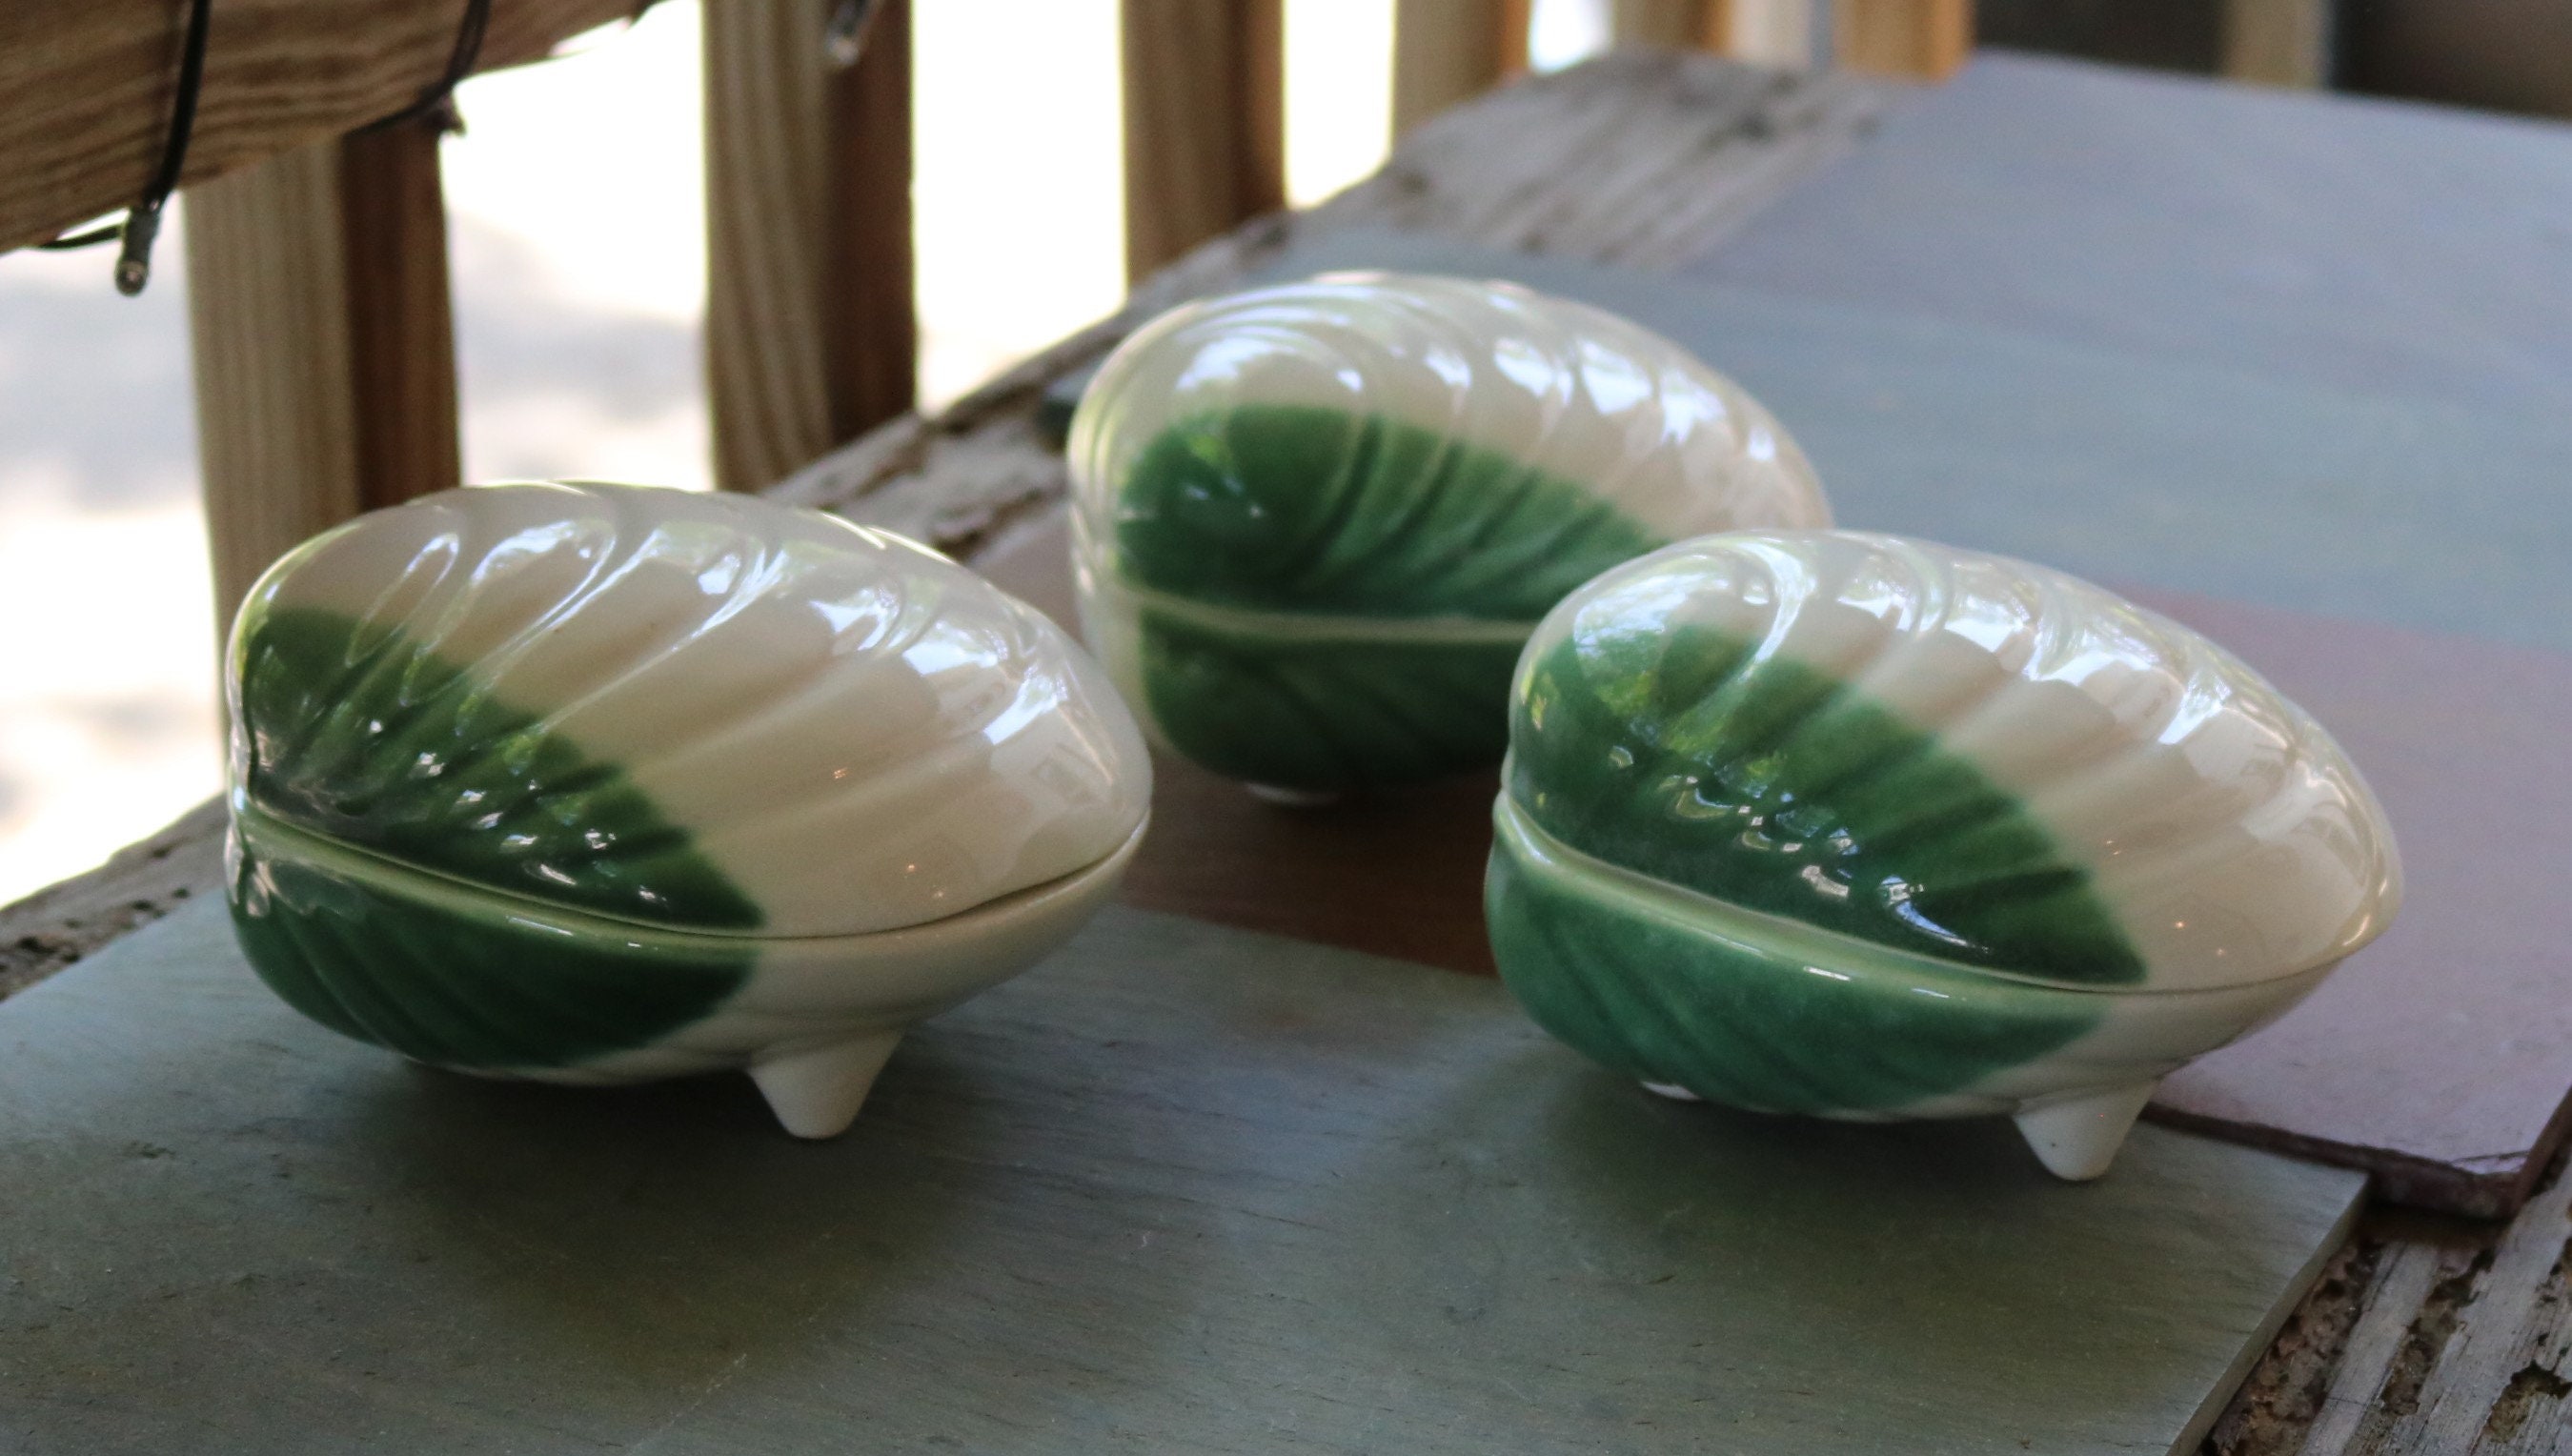 Three 50's Ceramic Clam Shell Covered Bowls For Chowder Or Seafood